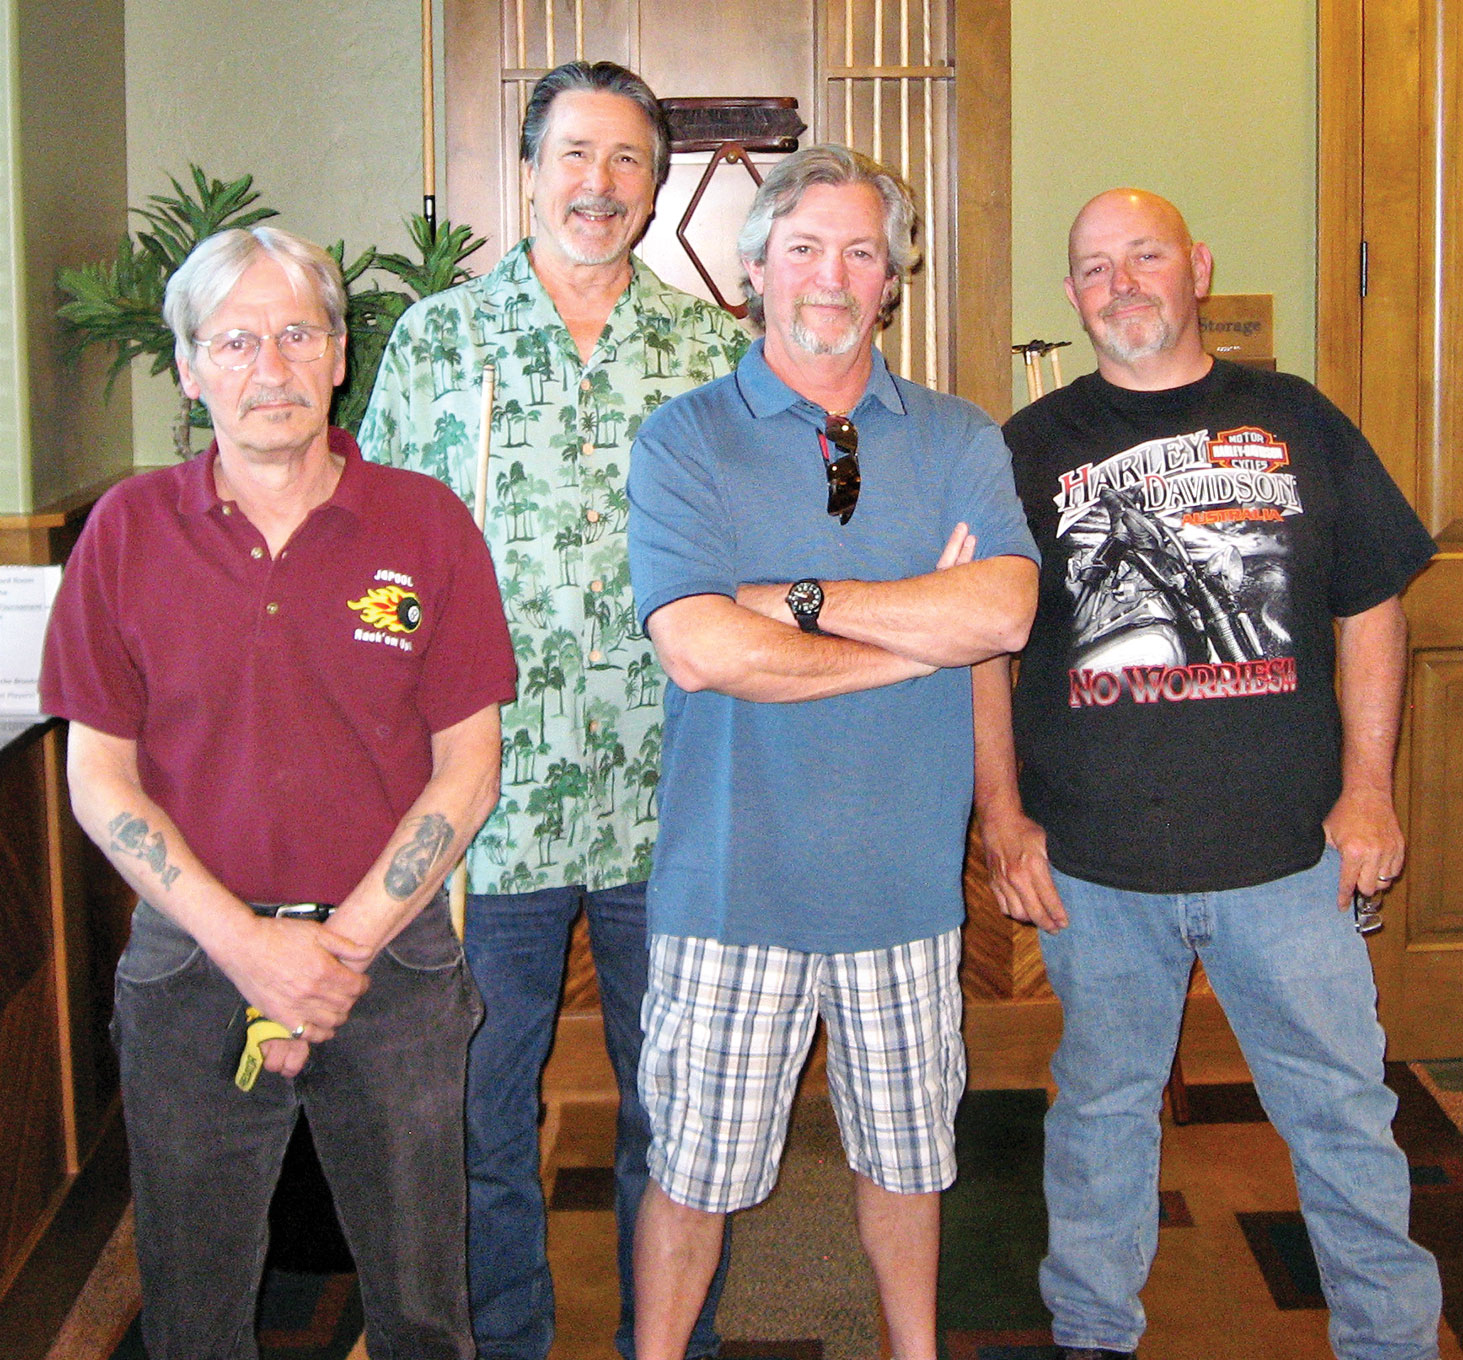 Joe Giammarino, second place; Tom Barrett, first place; Dominic Borland (TD), Les Brown (Ranch), third place. Not pictured is Bruce Fink, fourth place.